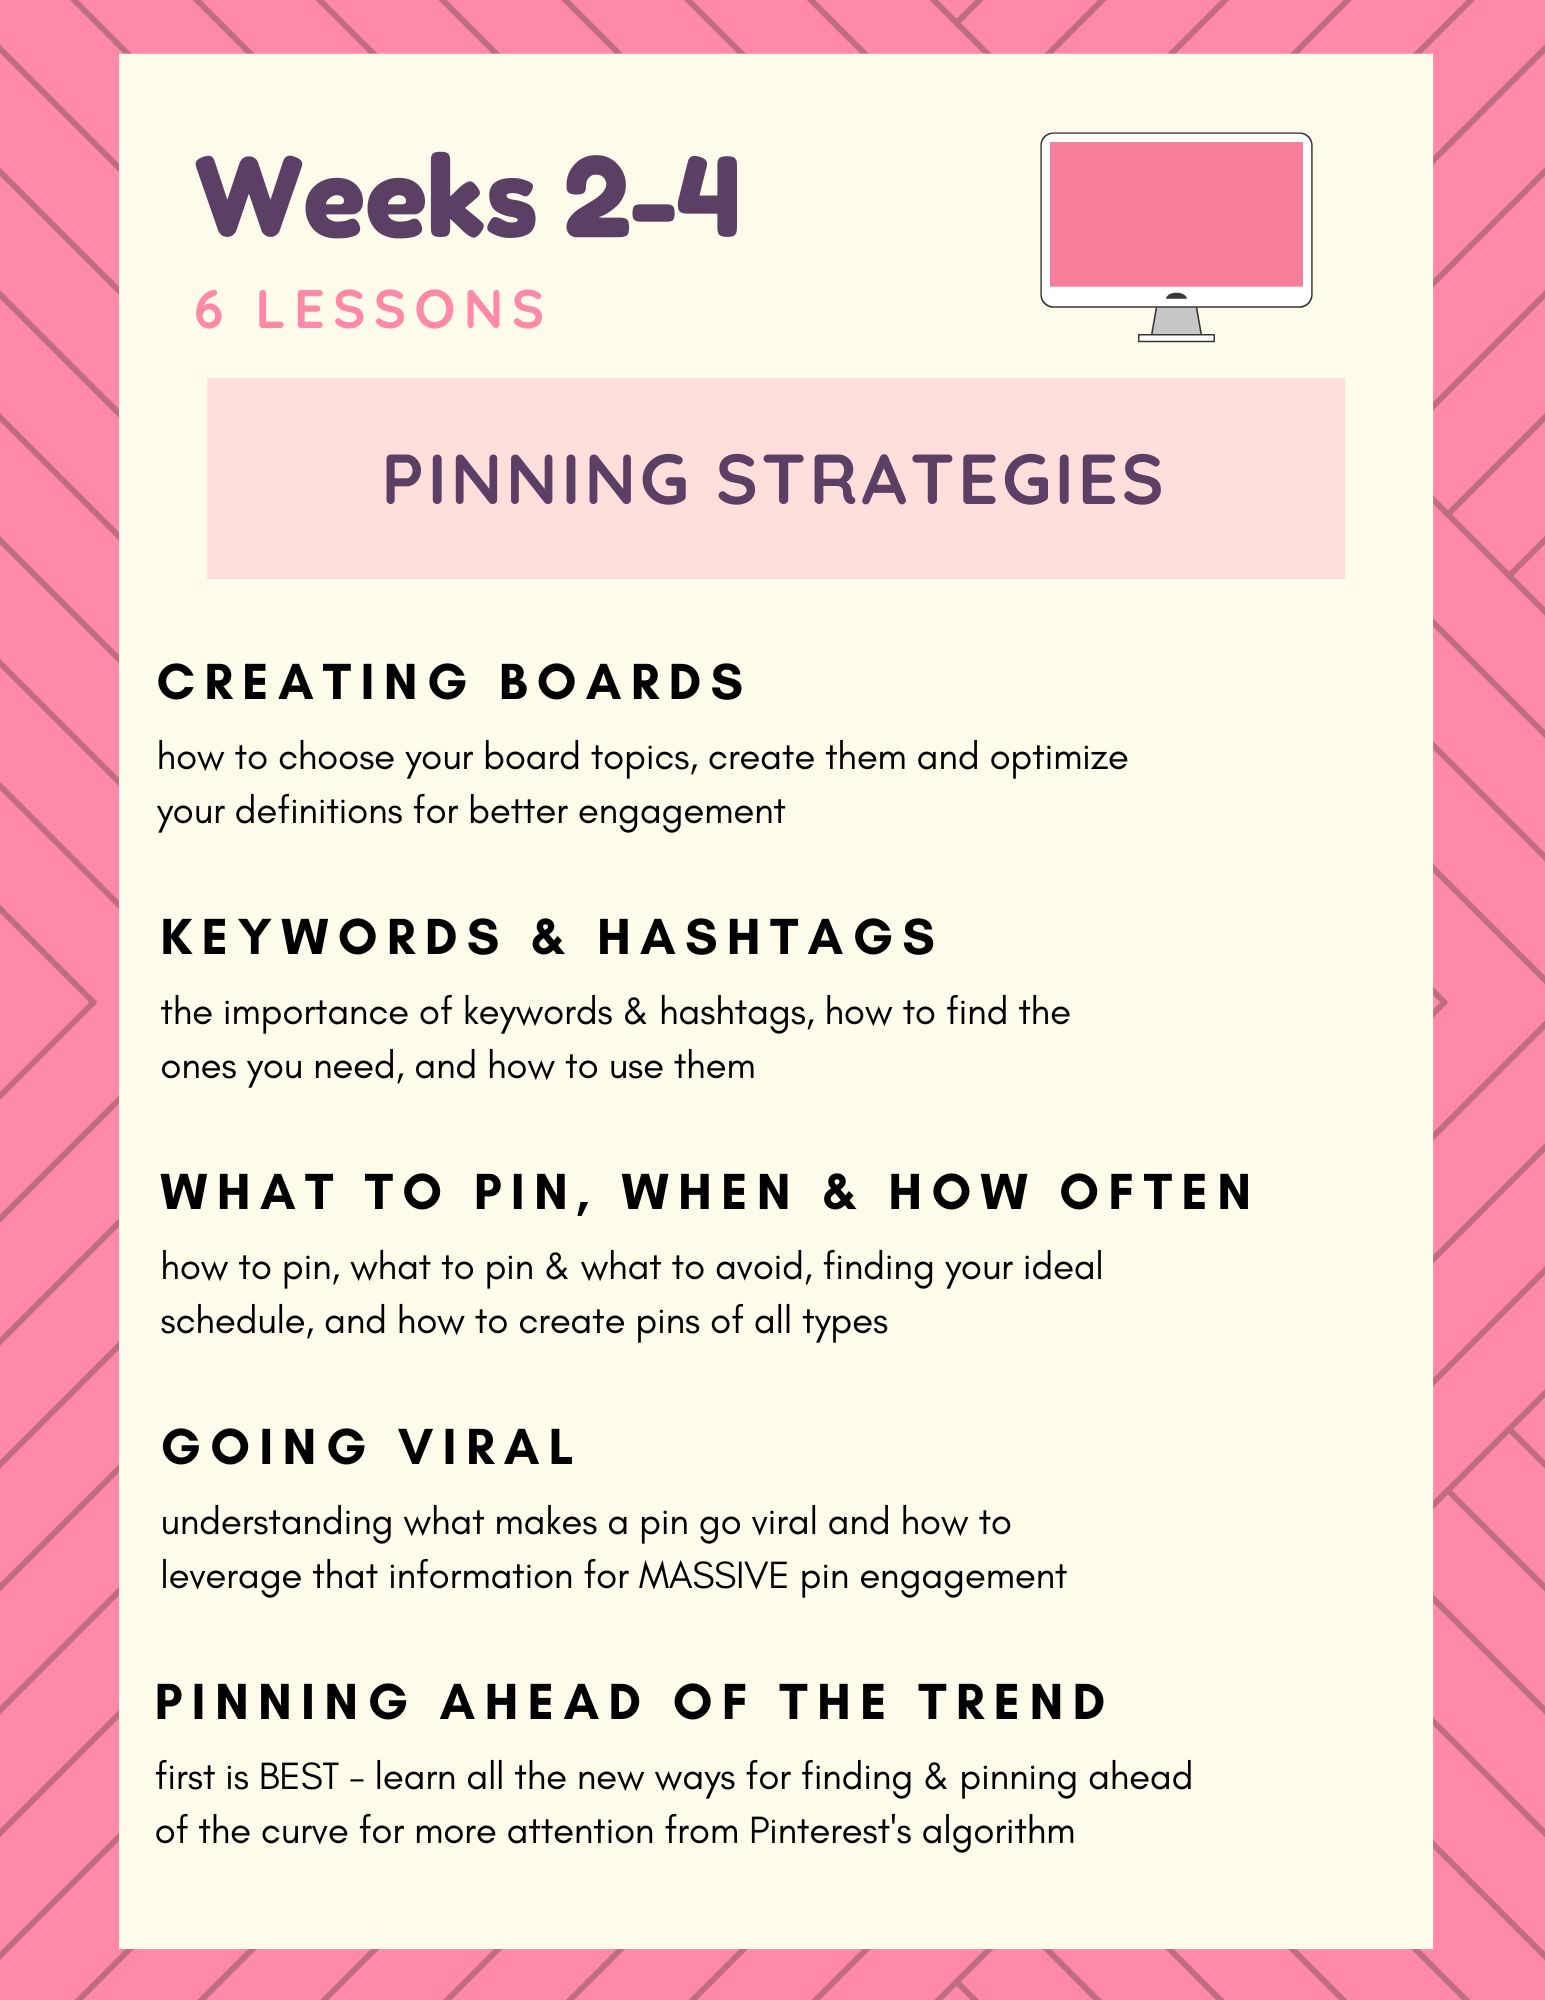 overview of weeks 2 to 4 course topics - pinning strategies